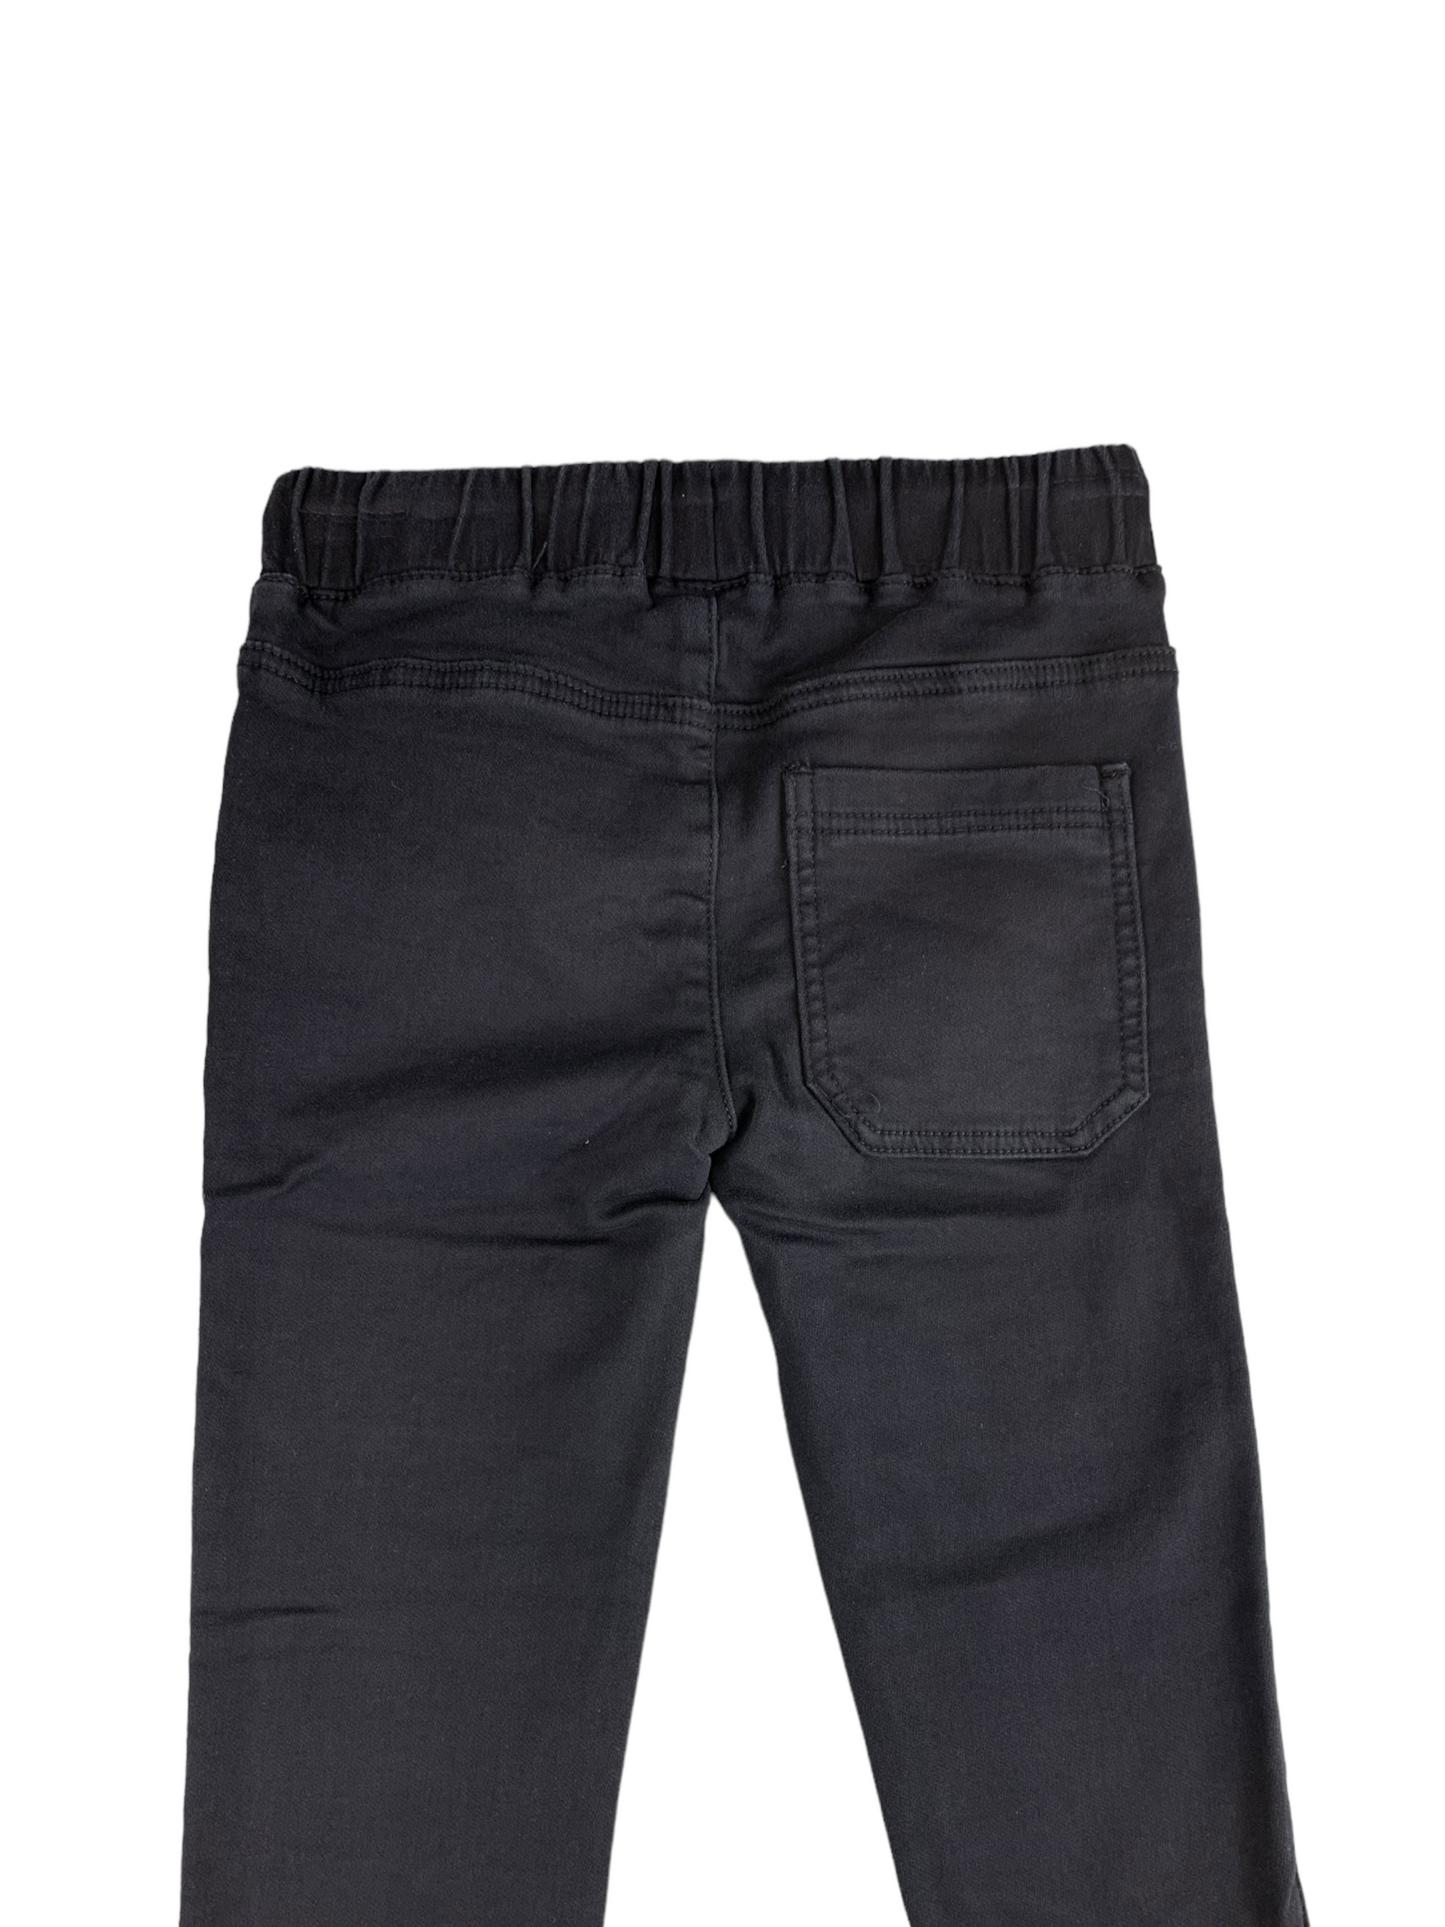 Black jogger for boys 8 to 16 years